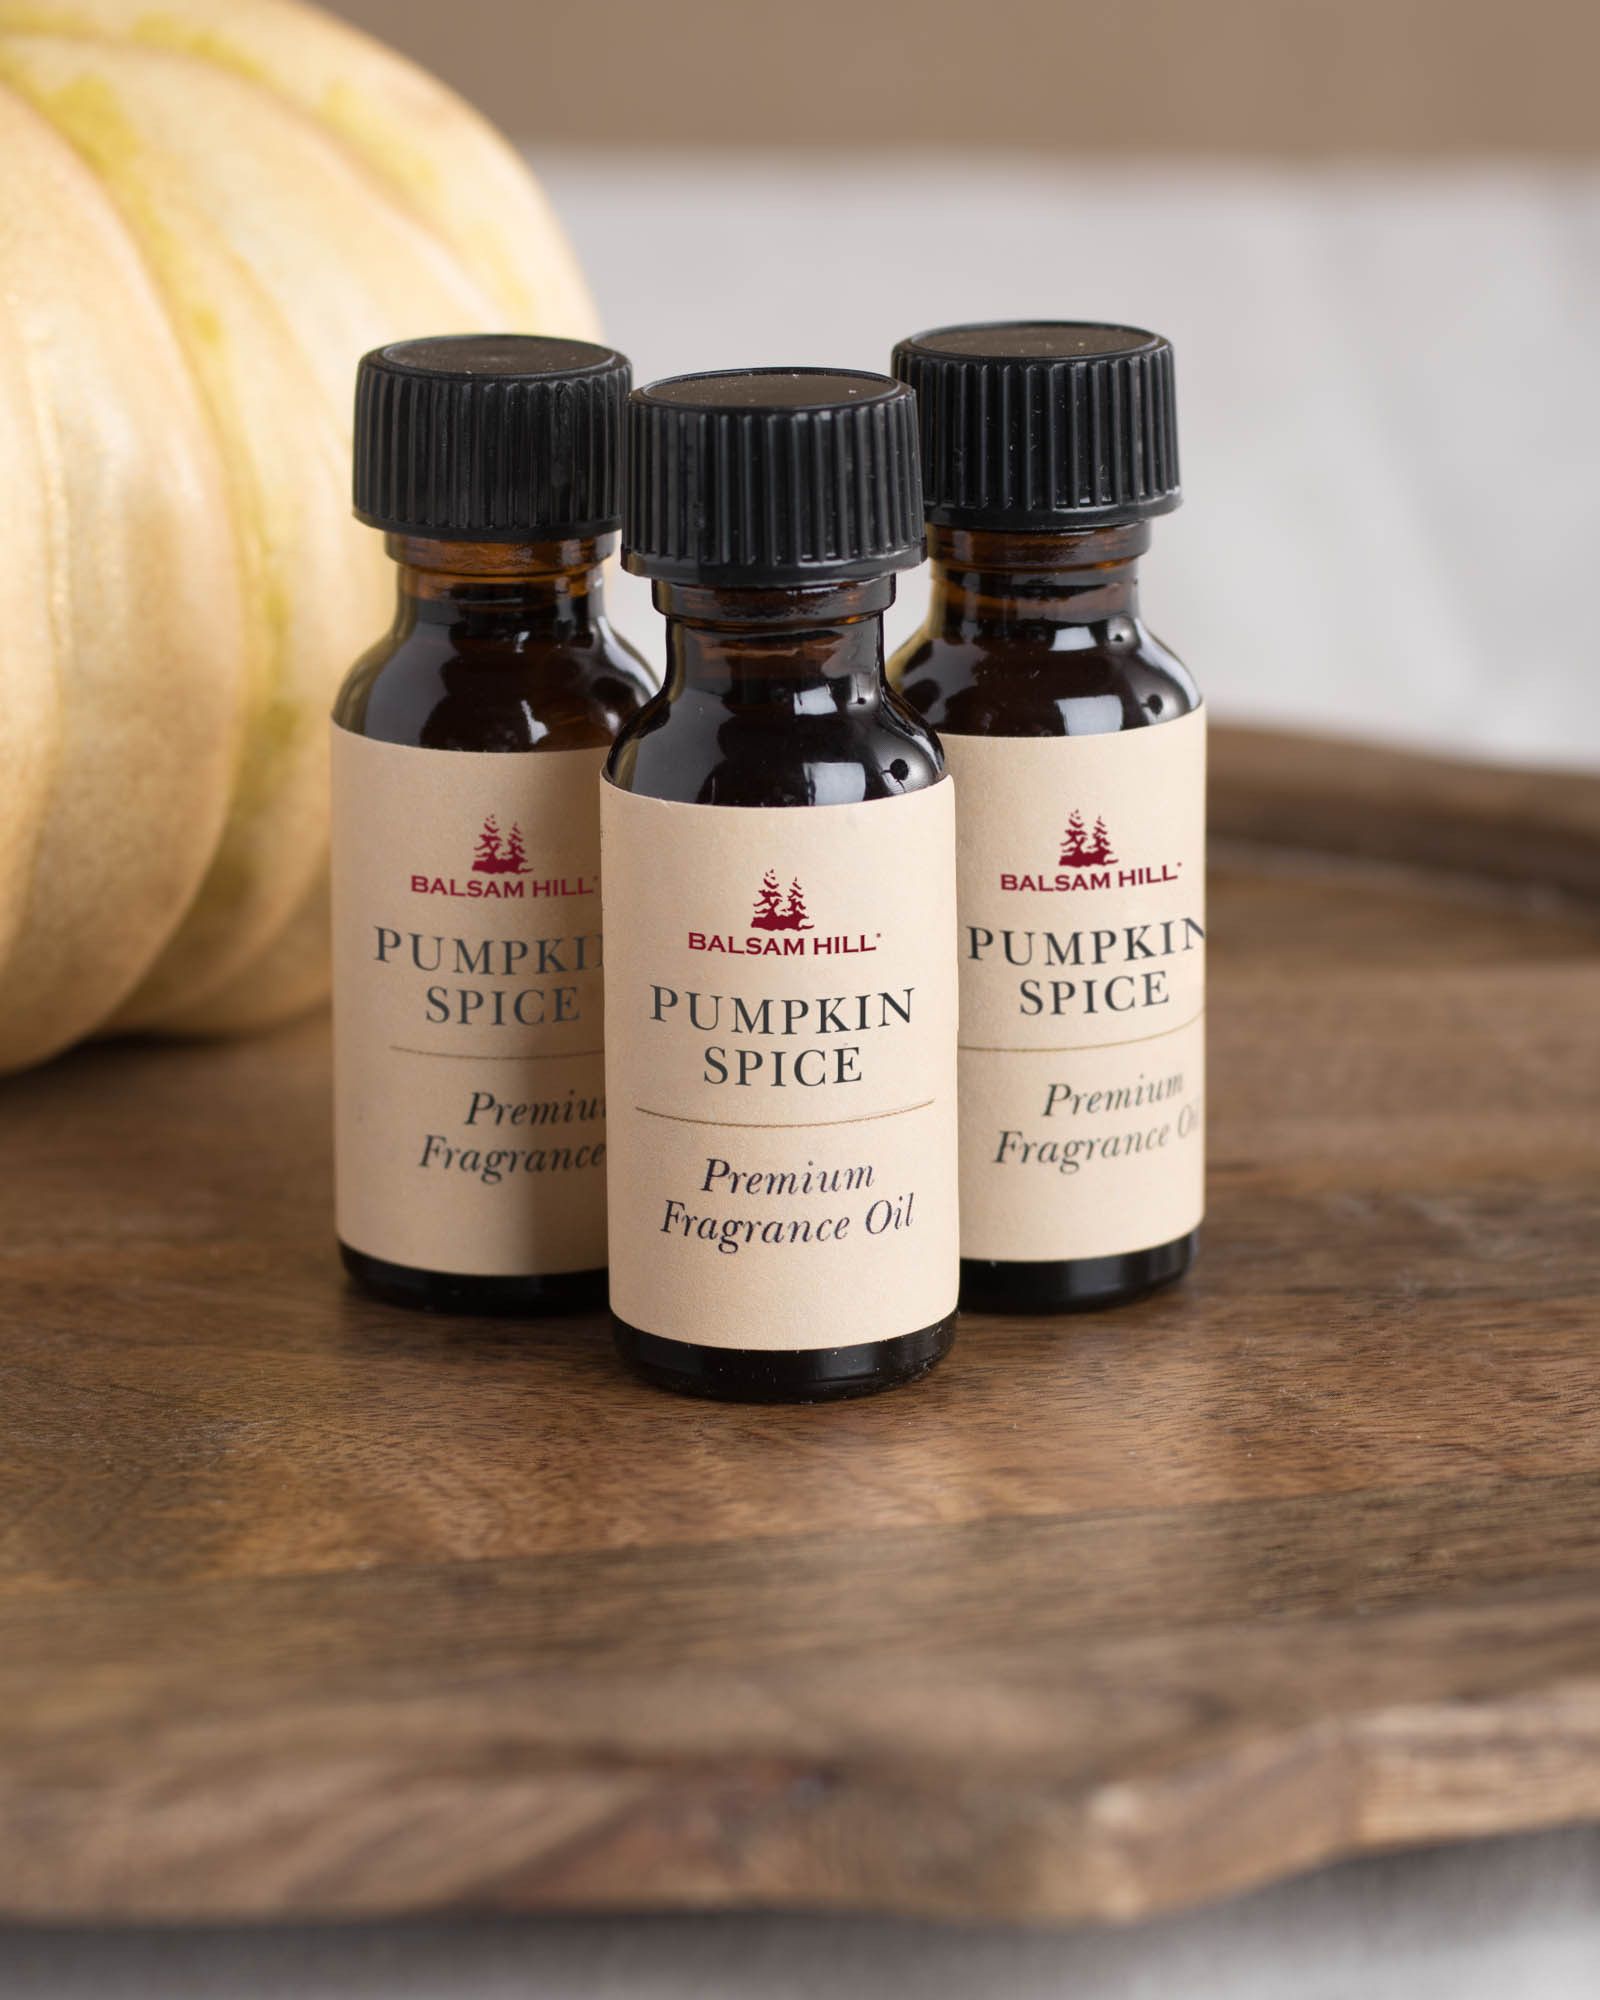 Balsam Hill Scents of the Season Cartridges, Set of 3 - Pumpkin Spice